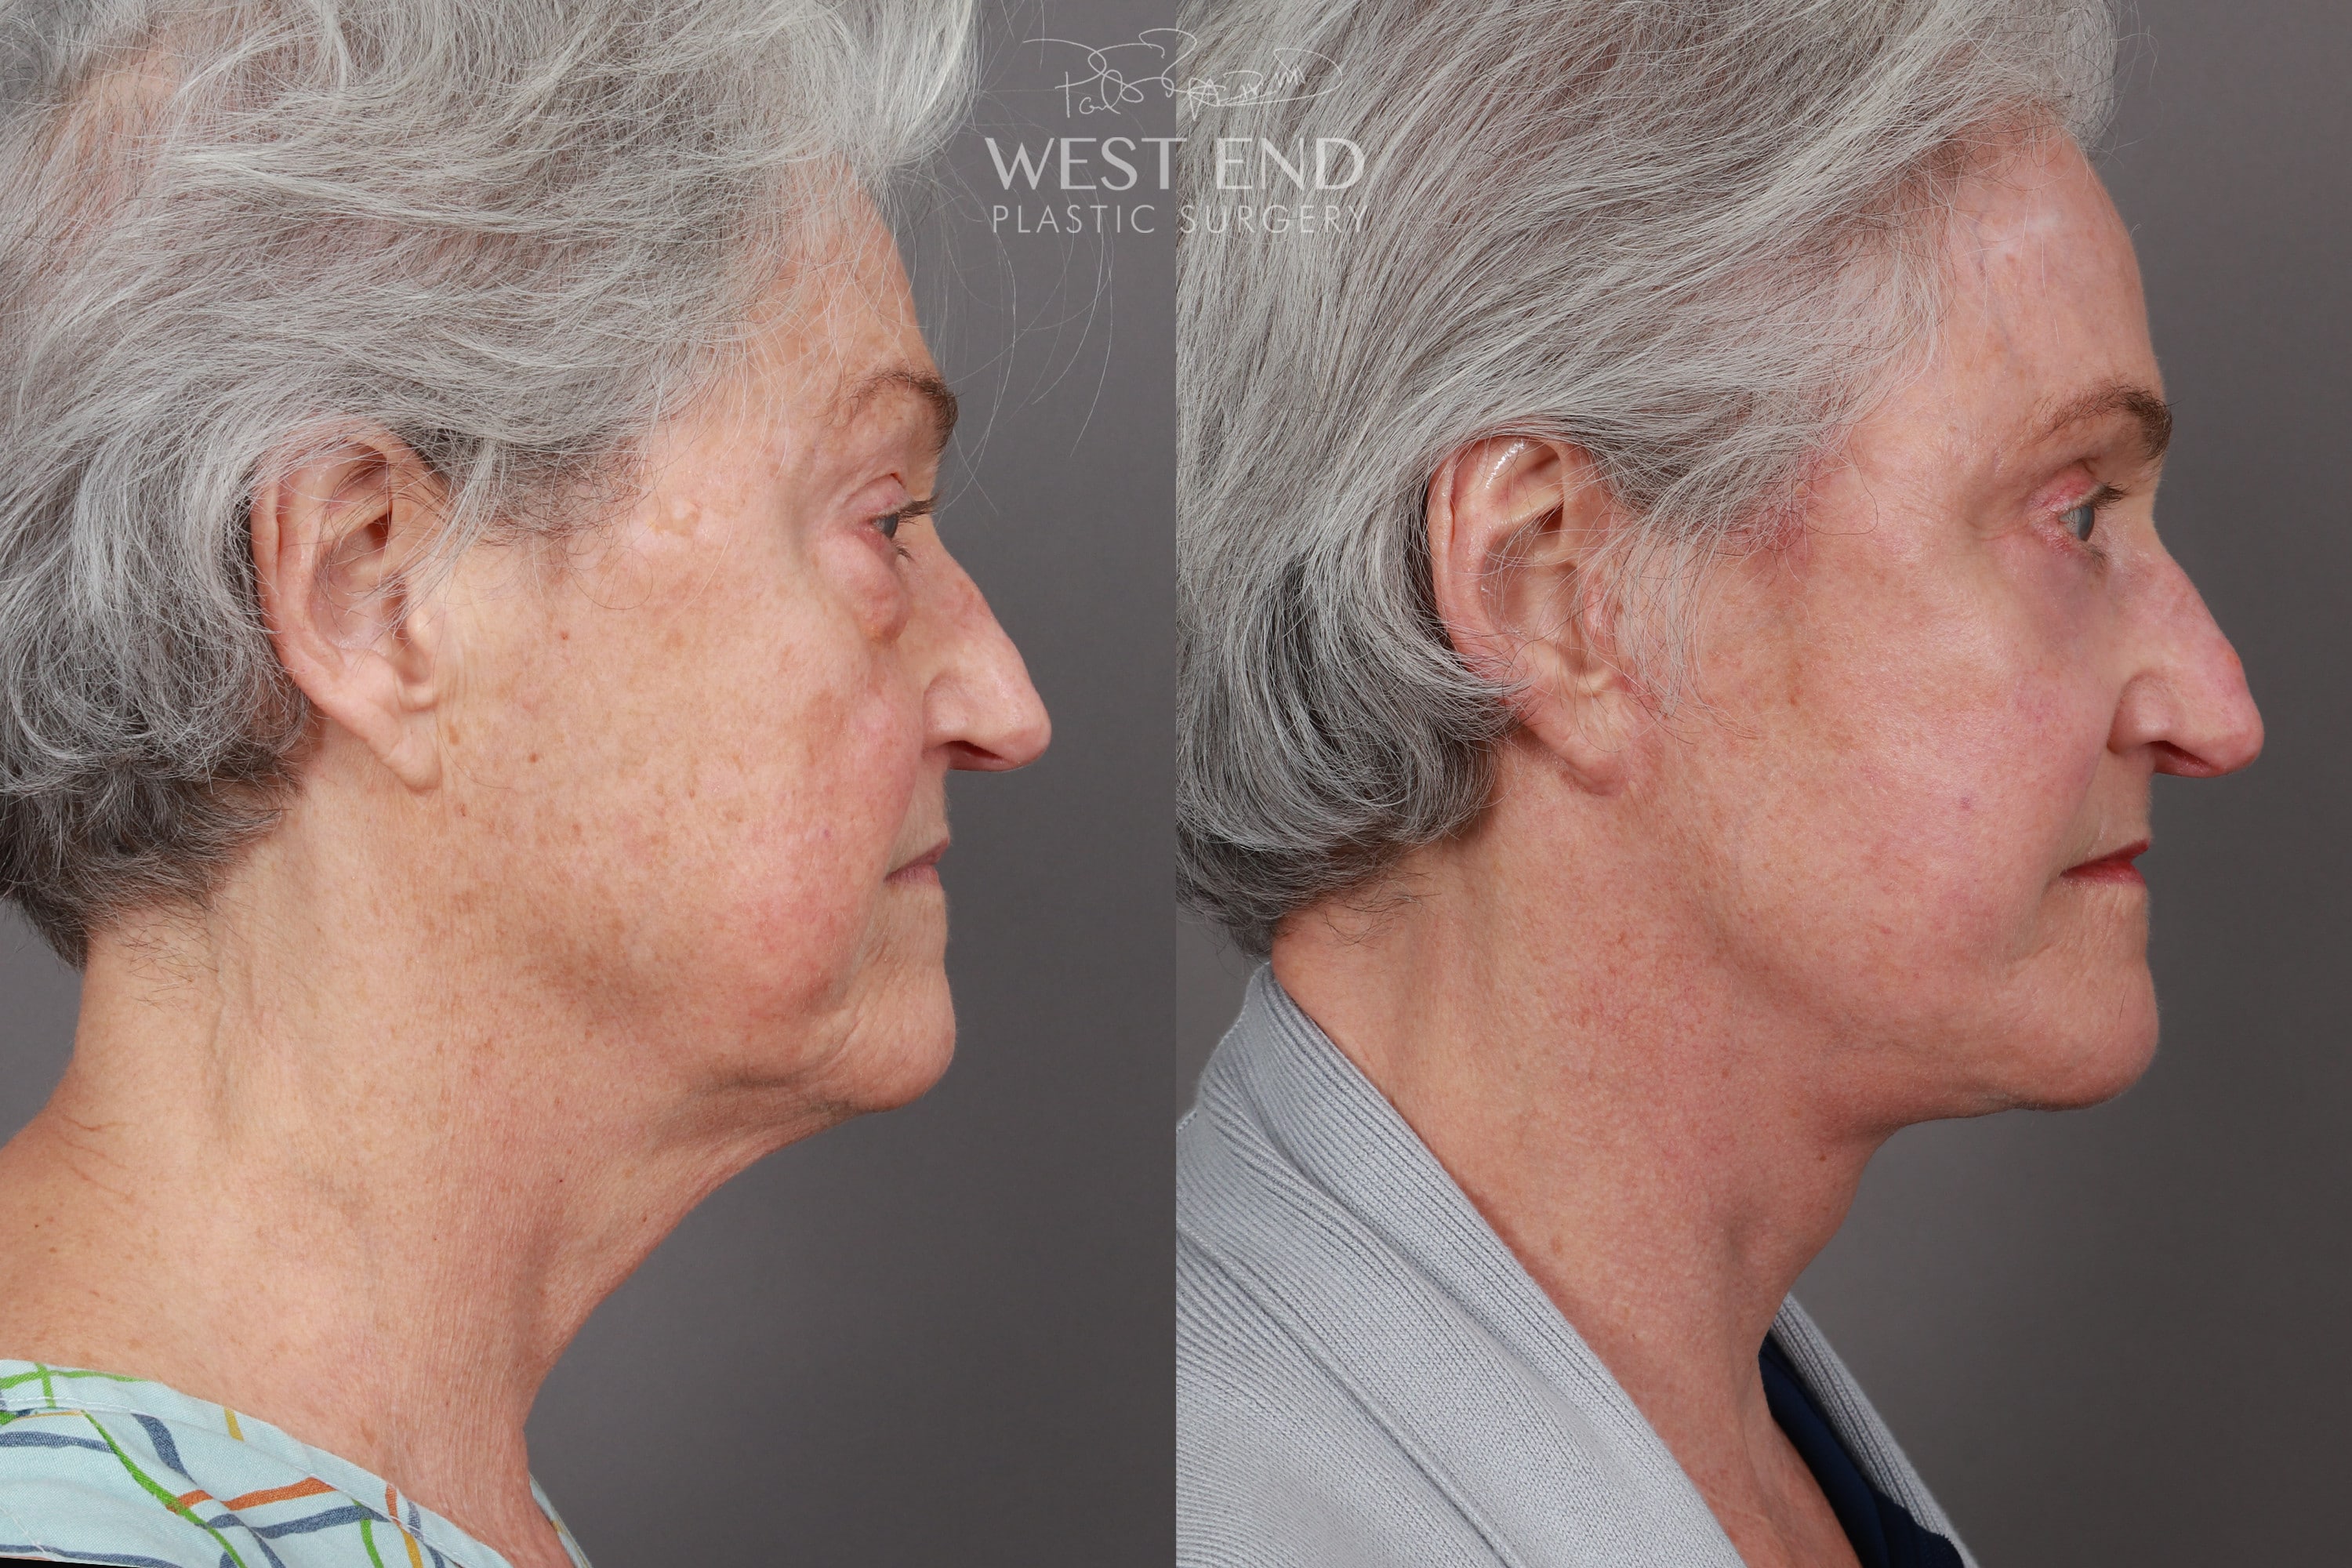 Deep Plane Facelift & Neck Lift, Eyelid Lift, Fat Grafting, and CO2 Resurfacing (1 Year Post-Op)